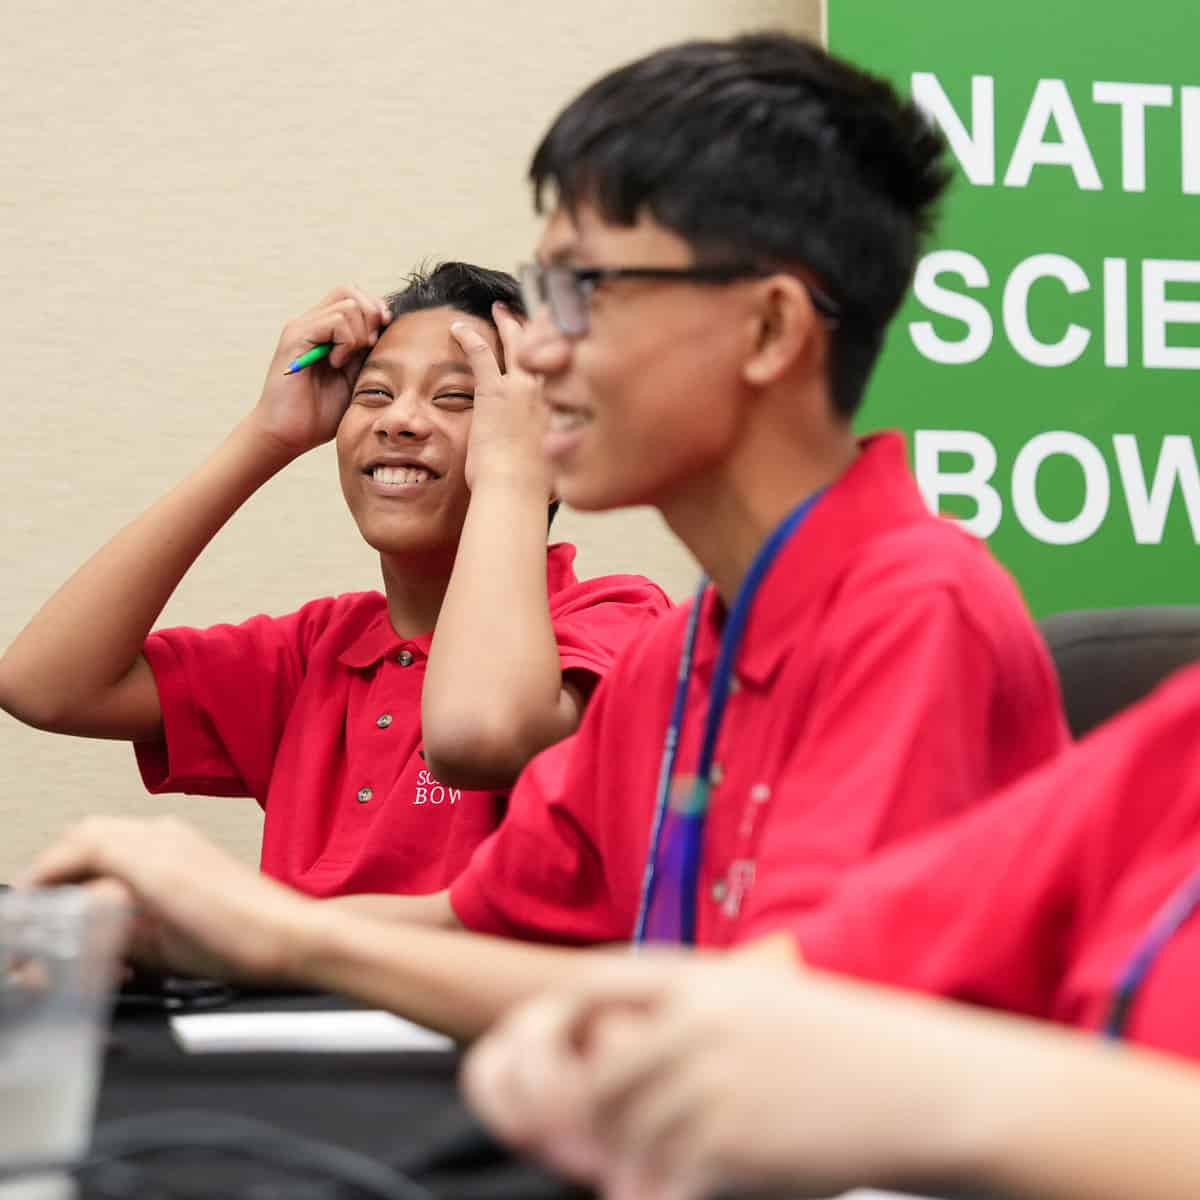 Princeton Charter School ties for 9th place at National Science Bowl in Washington, D.C.